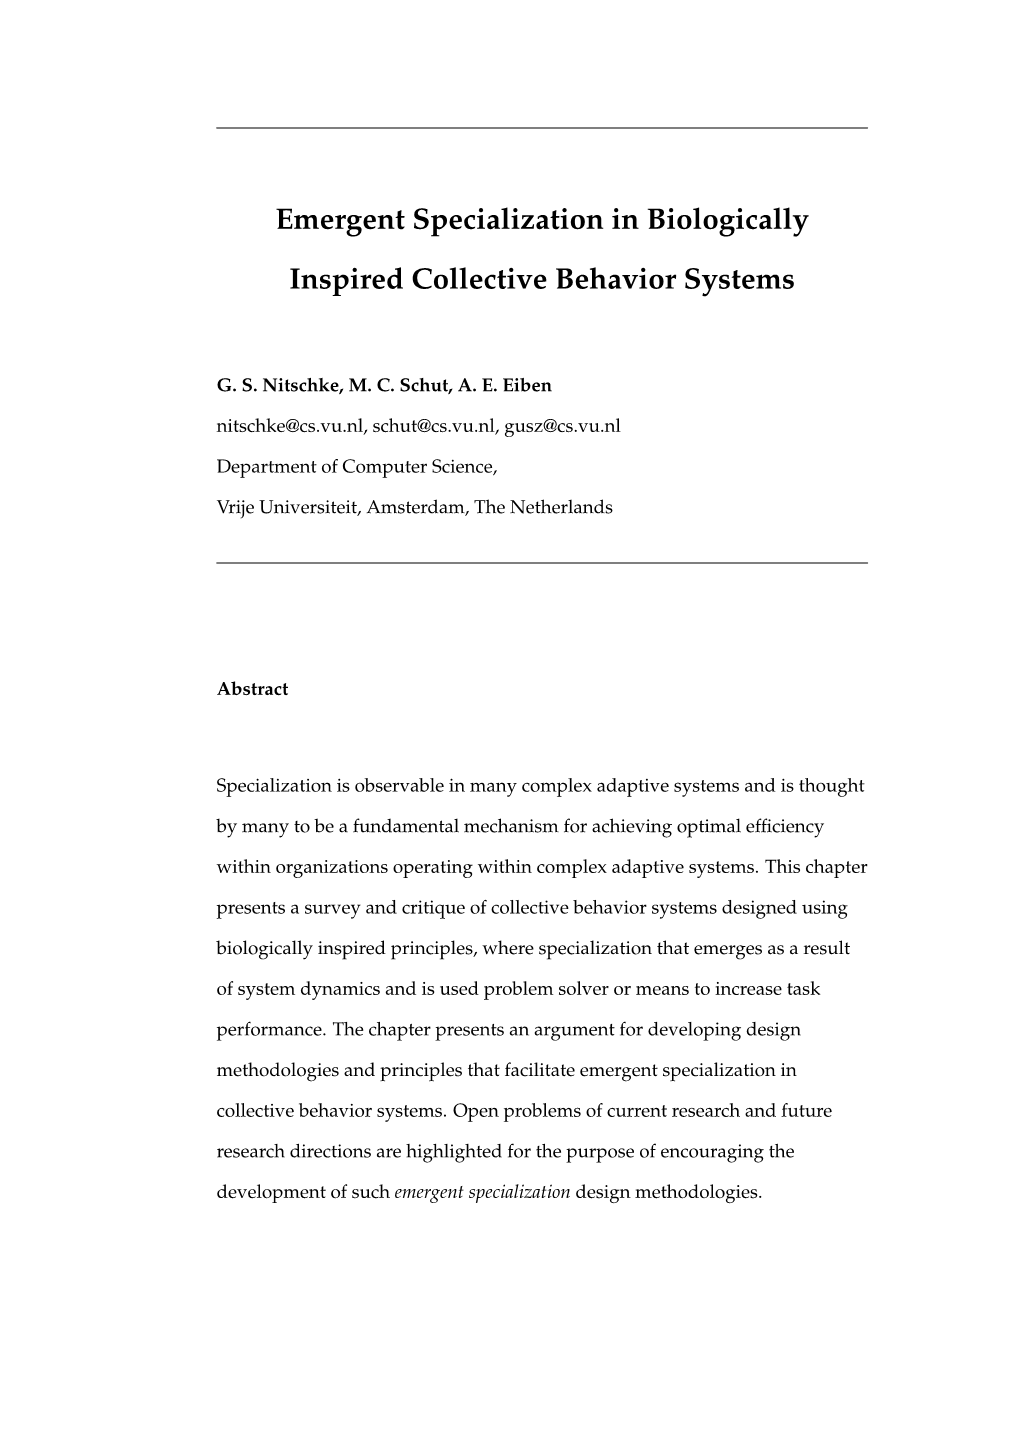 Emergent Specialization in Biologically Inspired Collective Behavior Systems